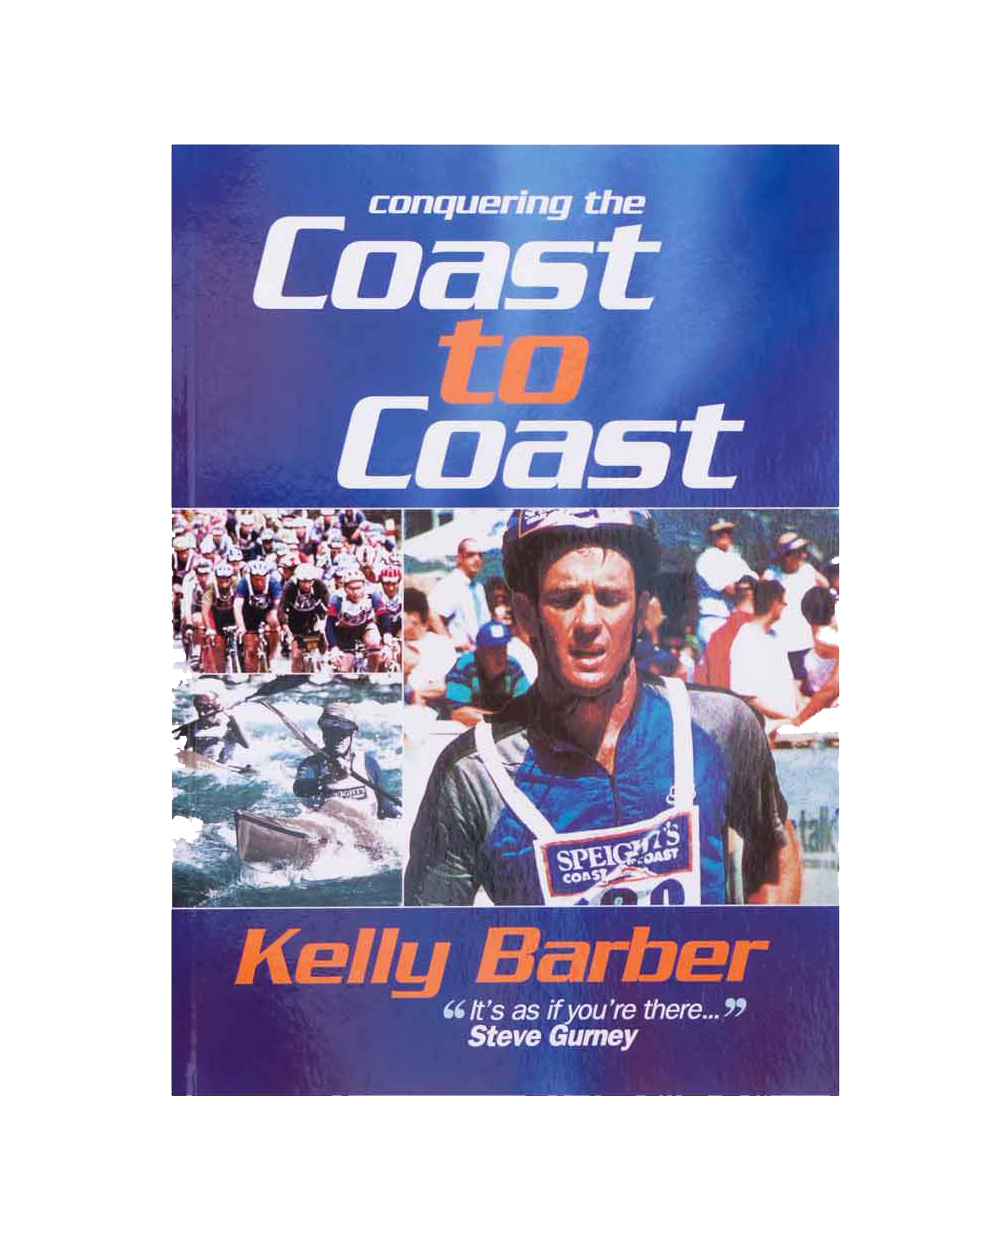 Conquering the Coast to Coast by Kelly Barber